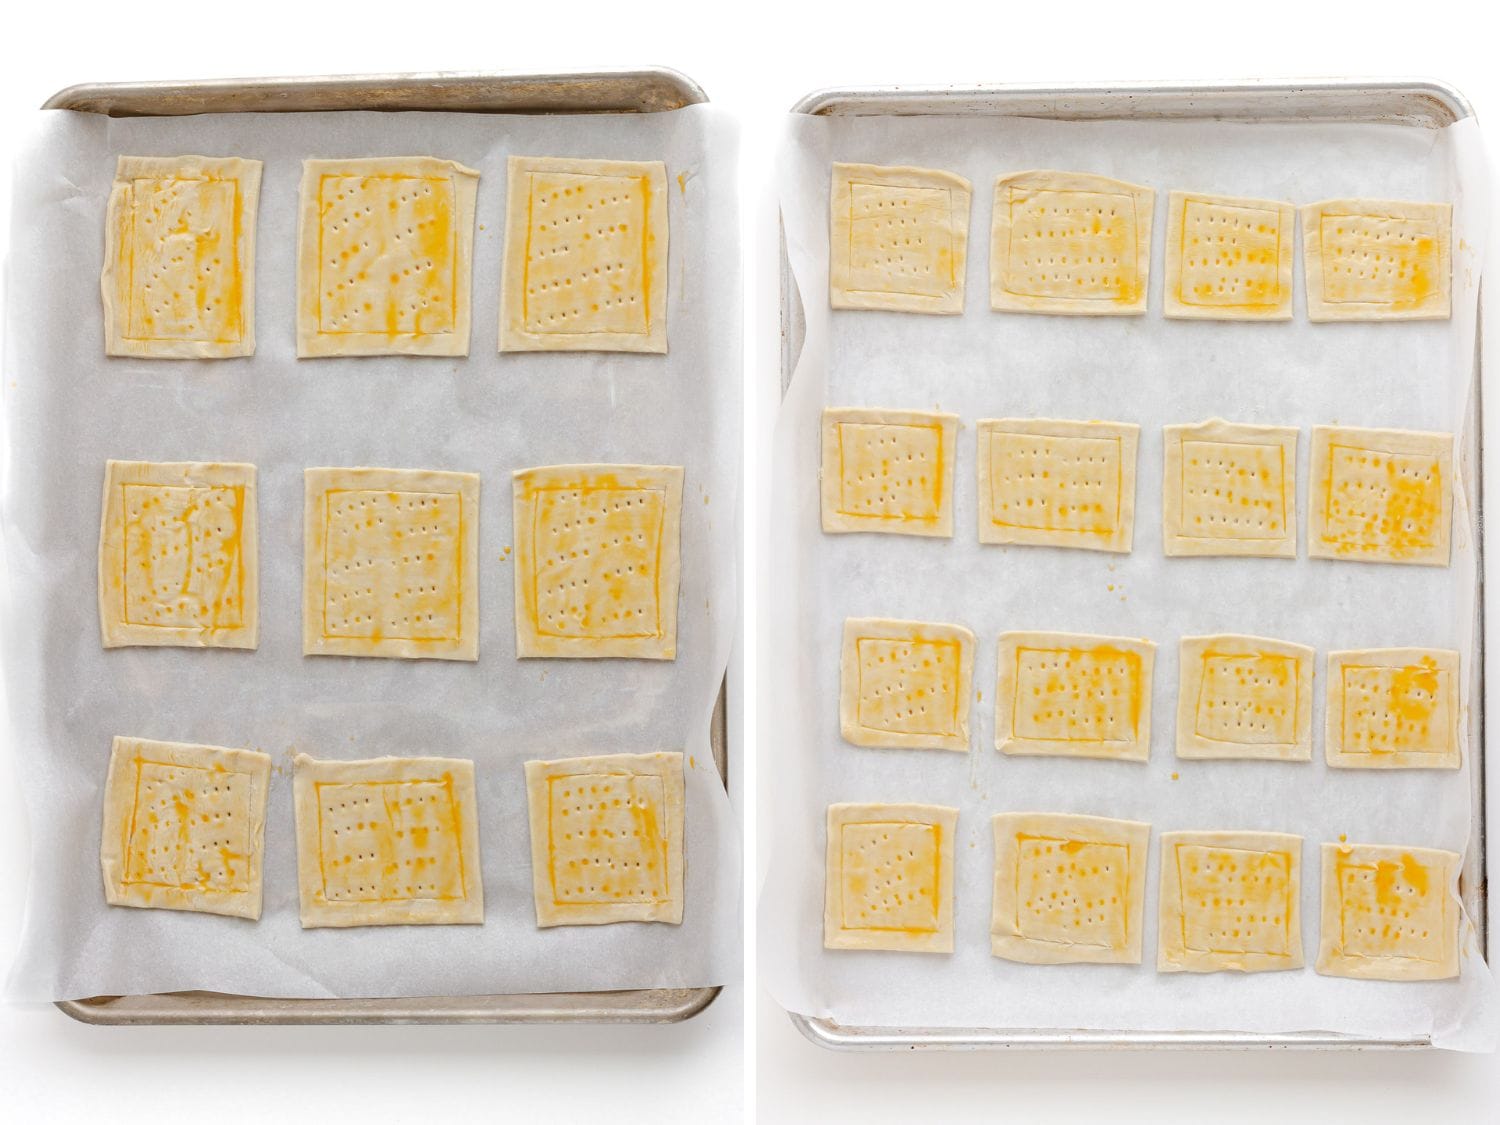 Photo collage showing different sizes of puff pastry squares on lined baking sheets for prebaking.